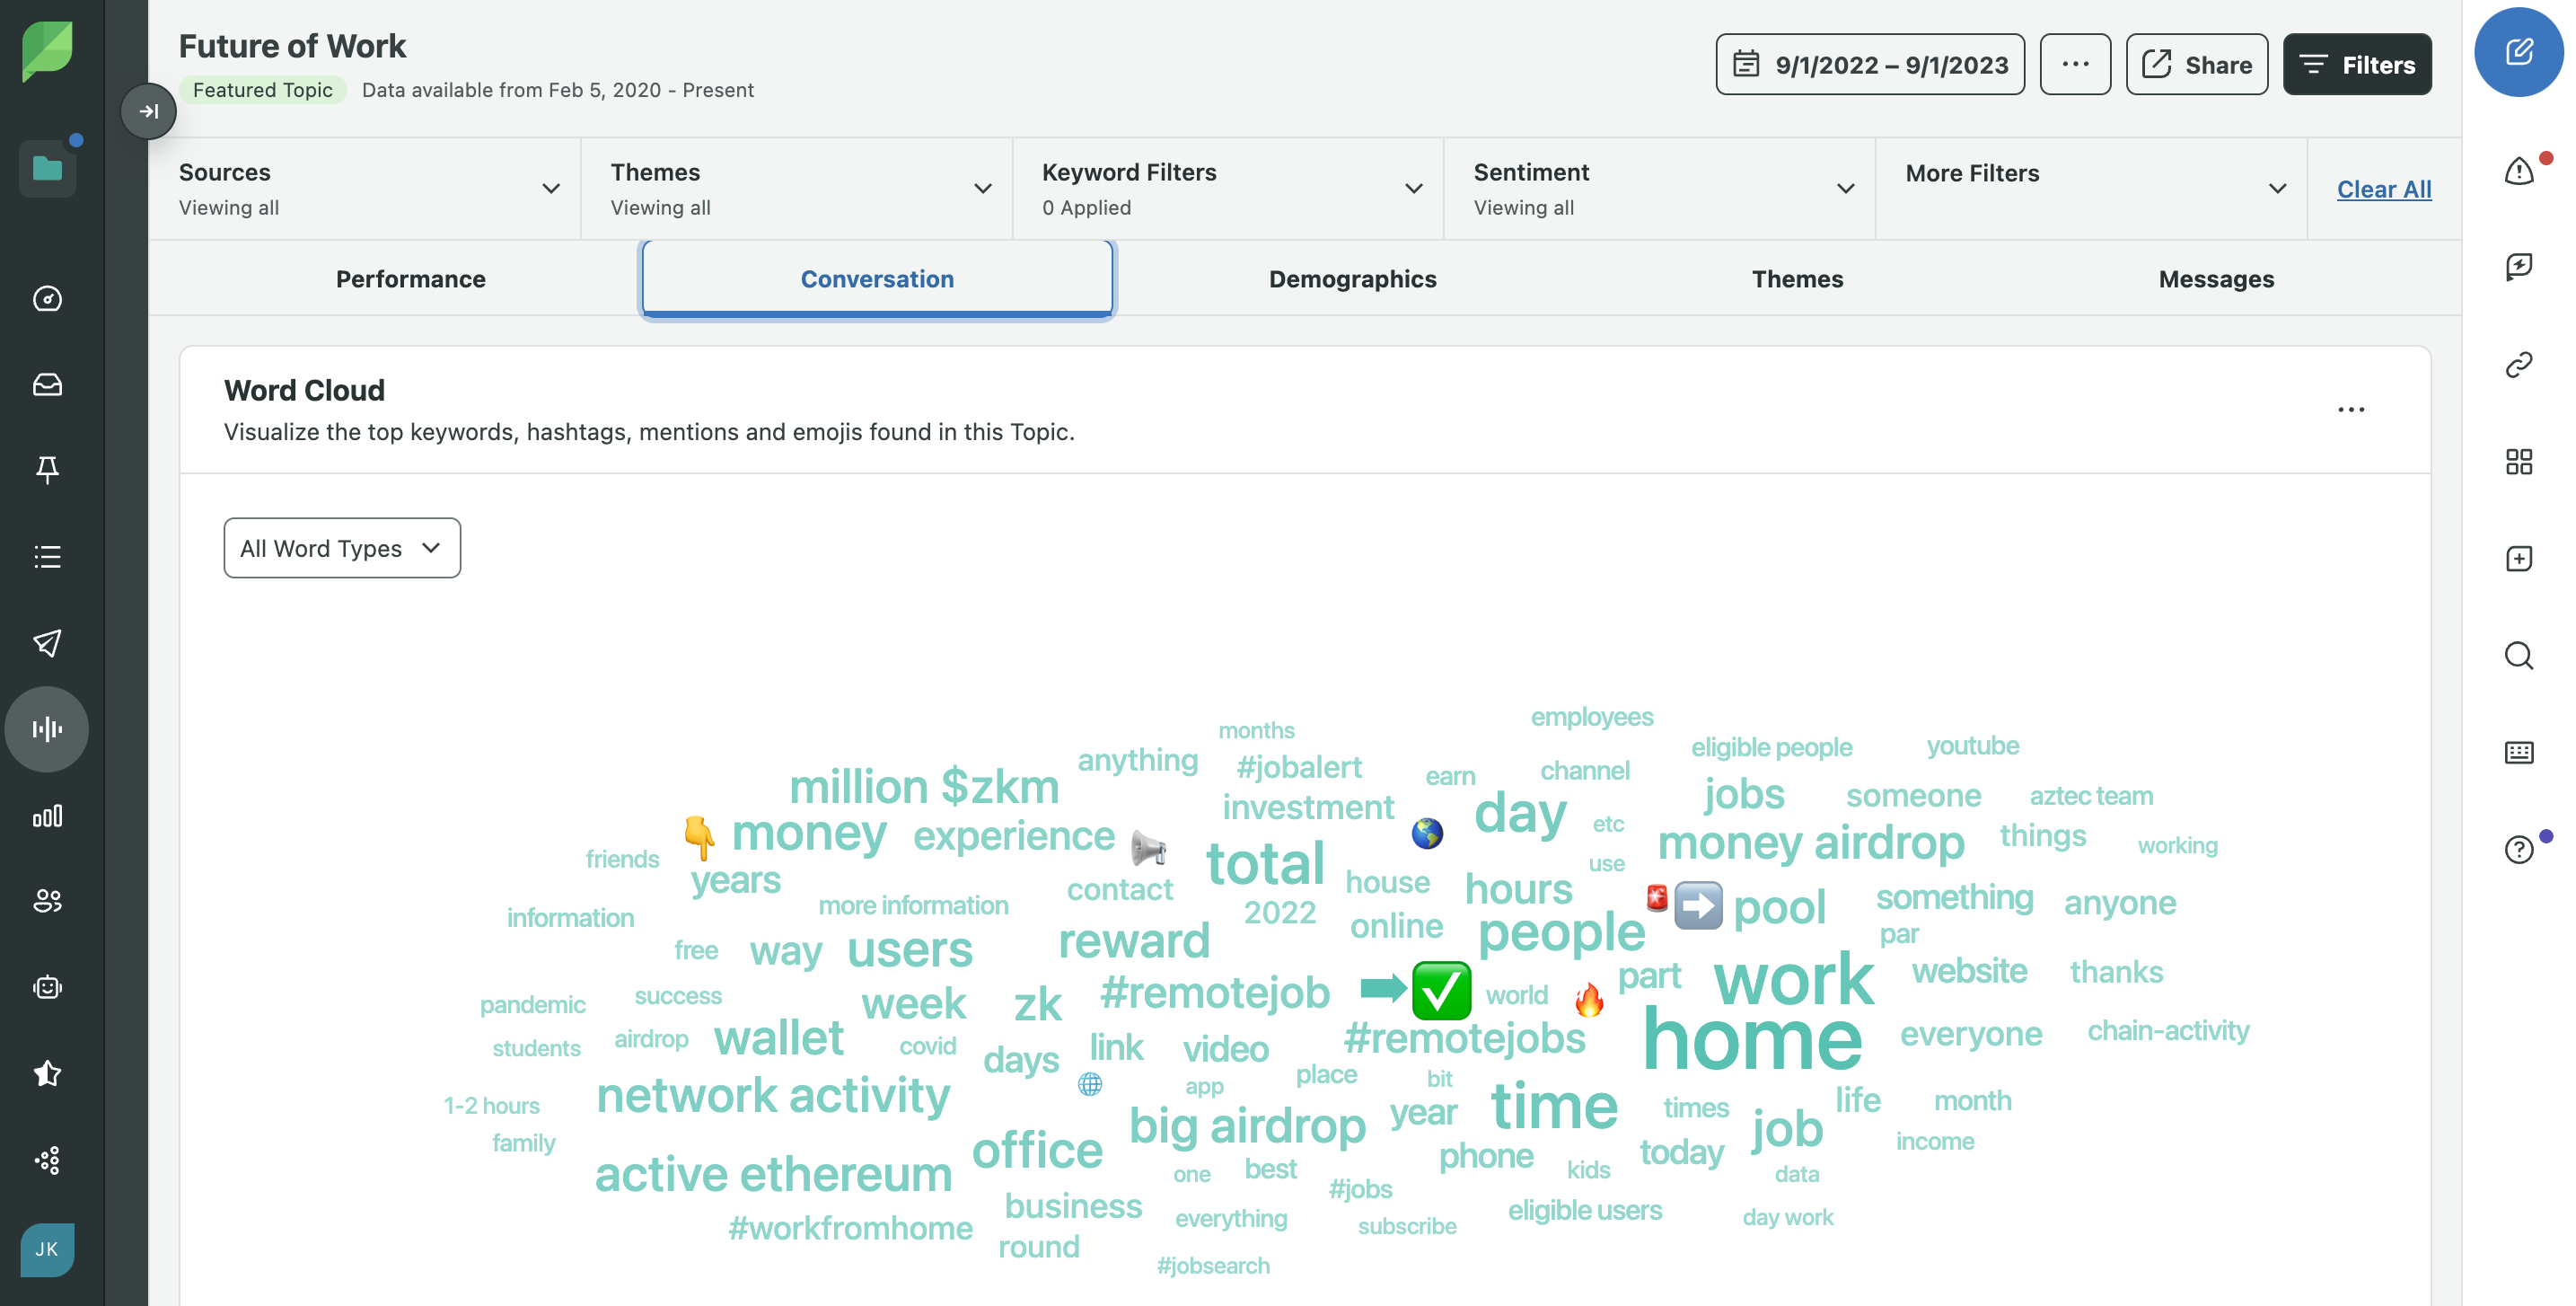 Word cloud featuring top keywords, hashtags, mentions and emojis for the Future of Work topic, within Sprout Social's Listening dashboard.